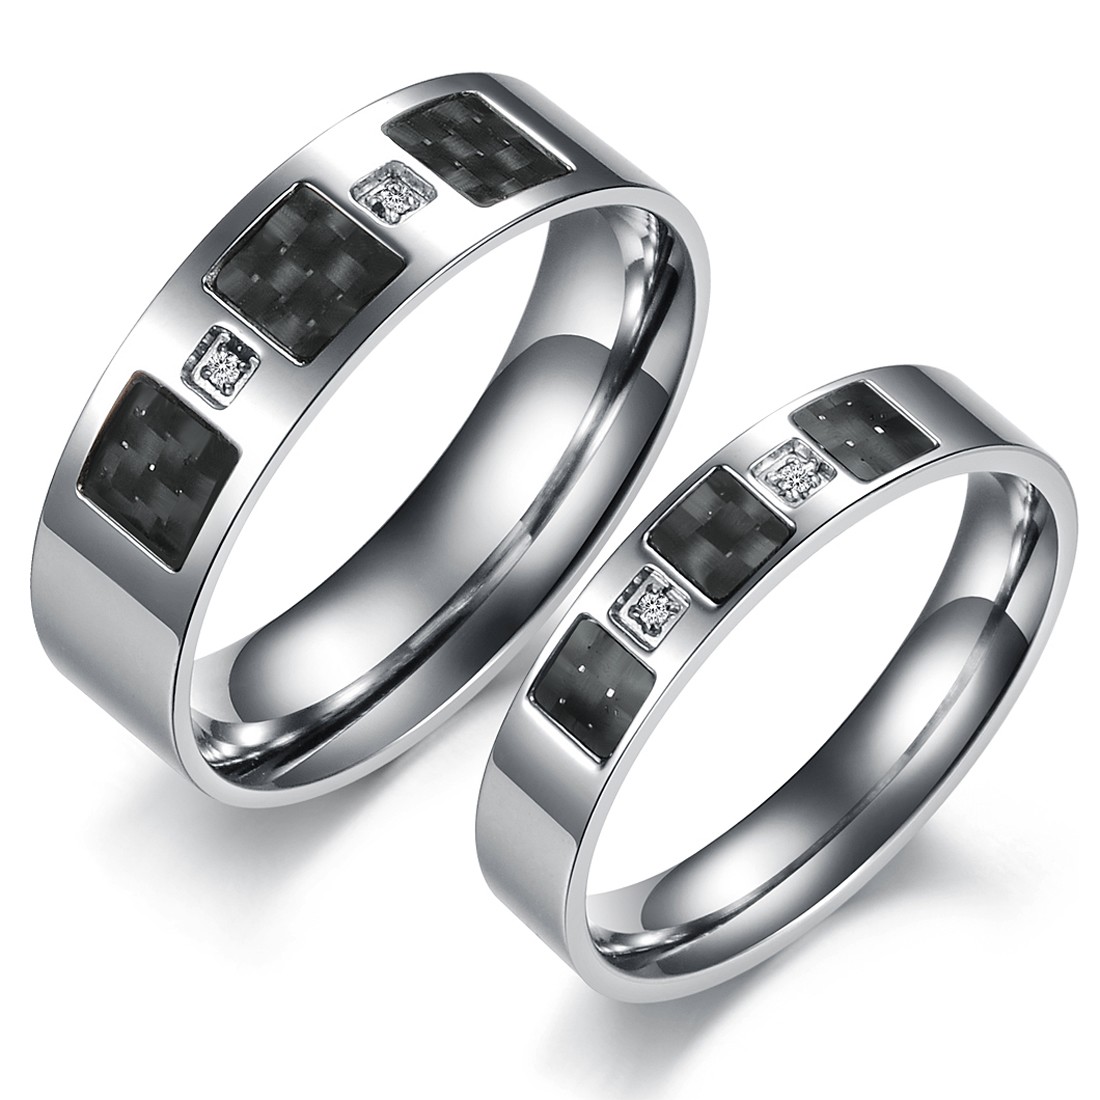 ... rings sets stainless steel couple ring for men and women wedding ring